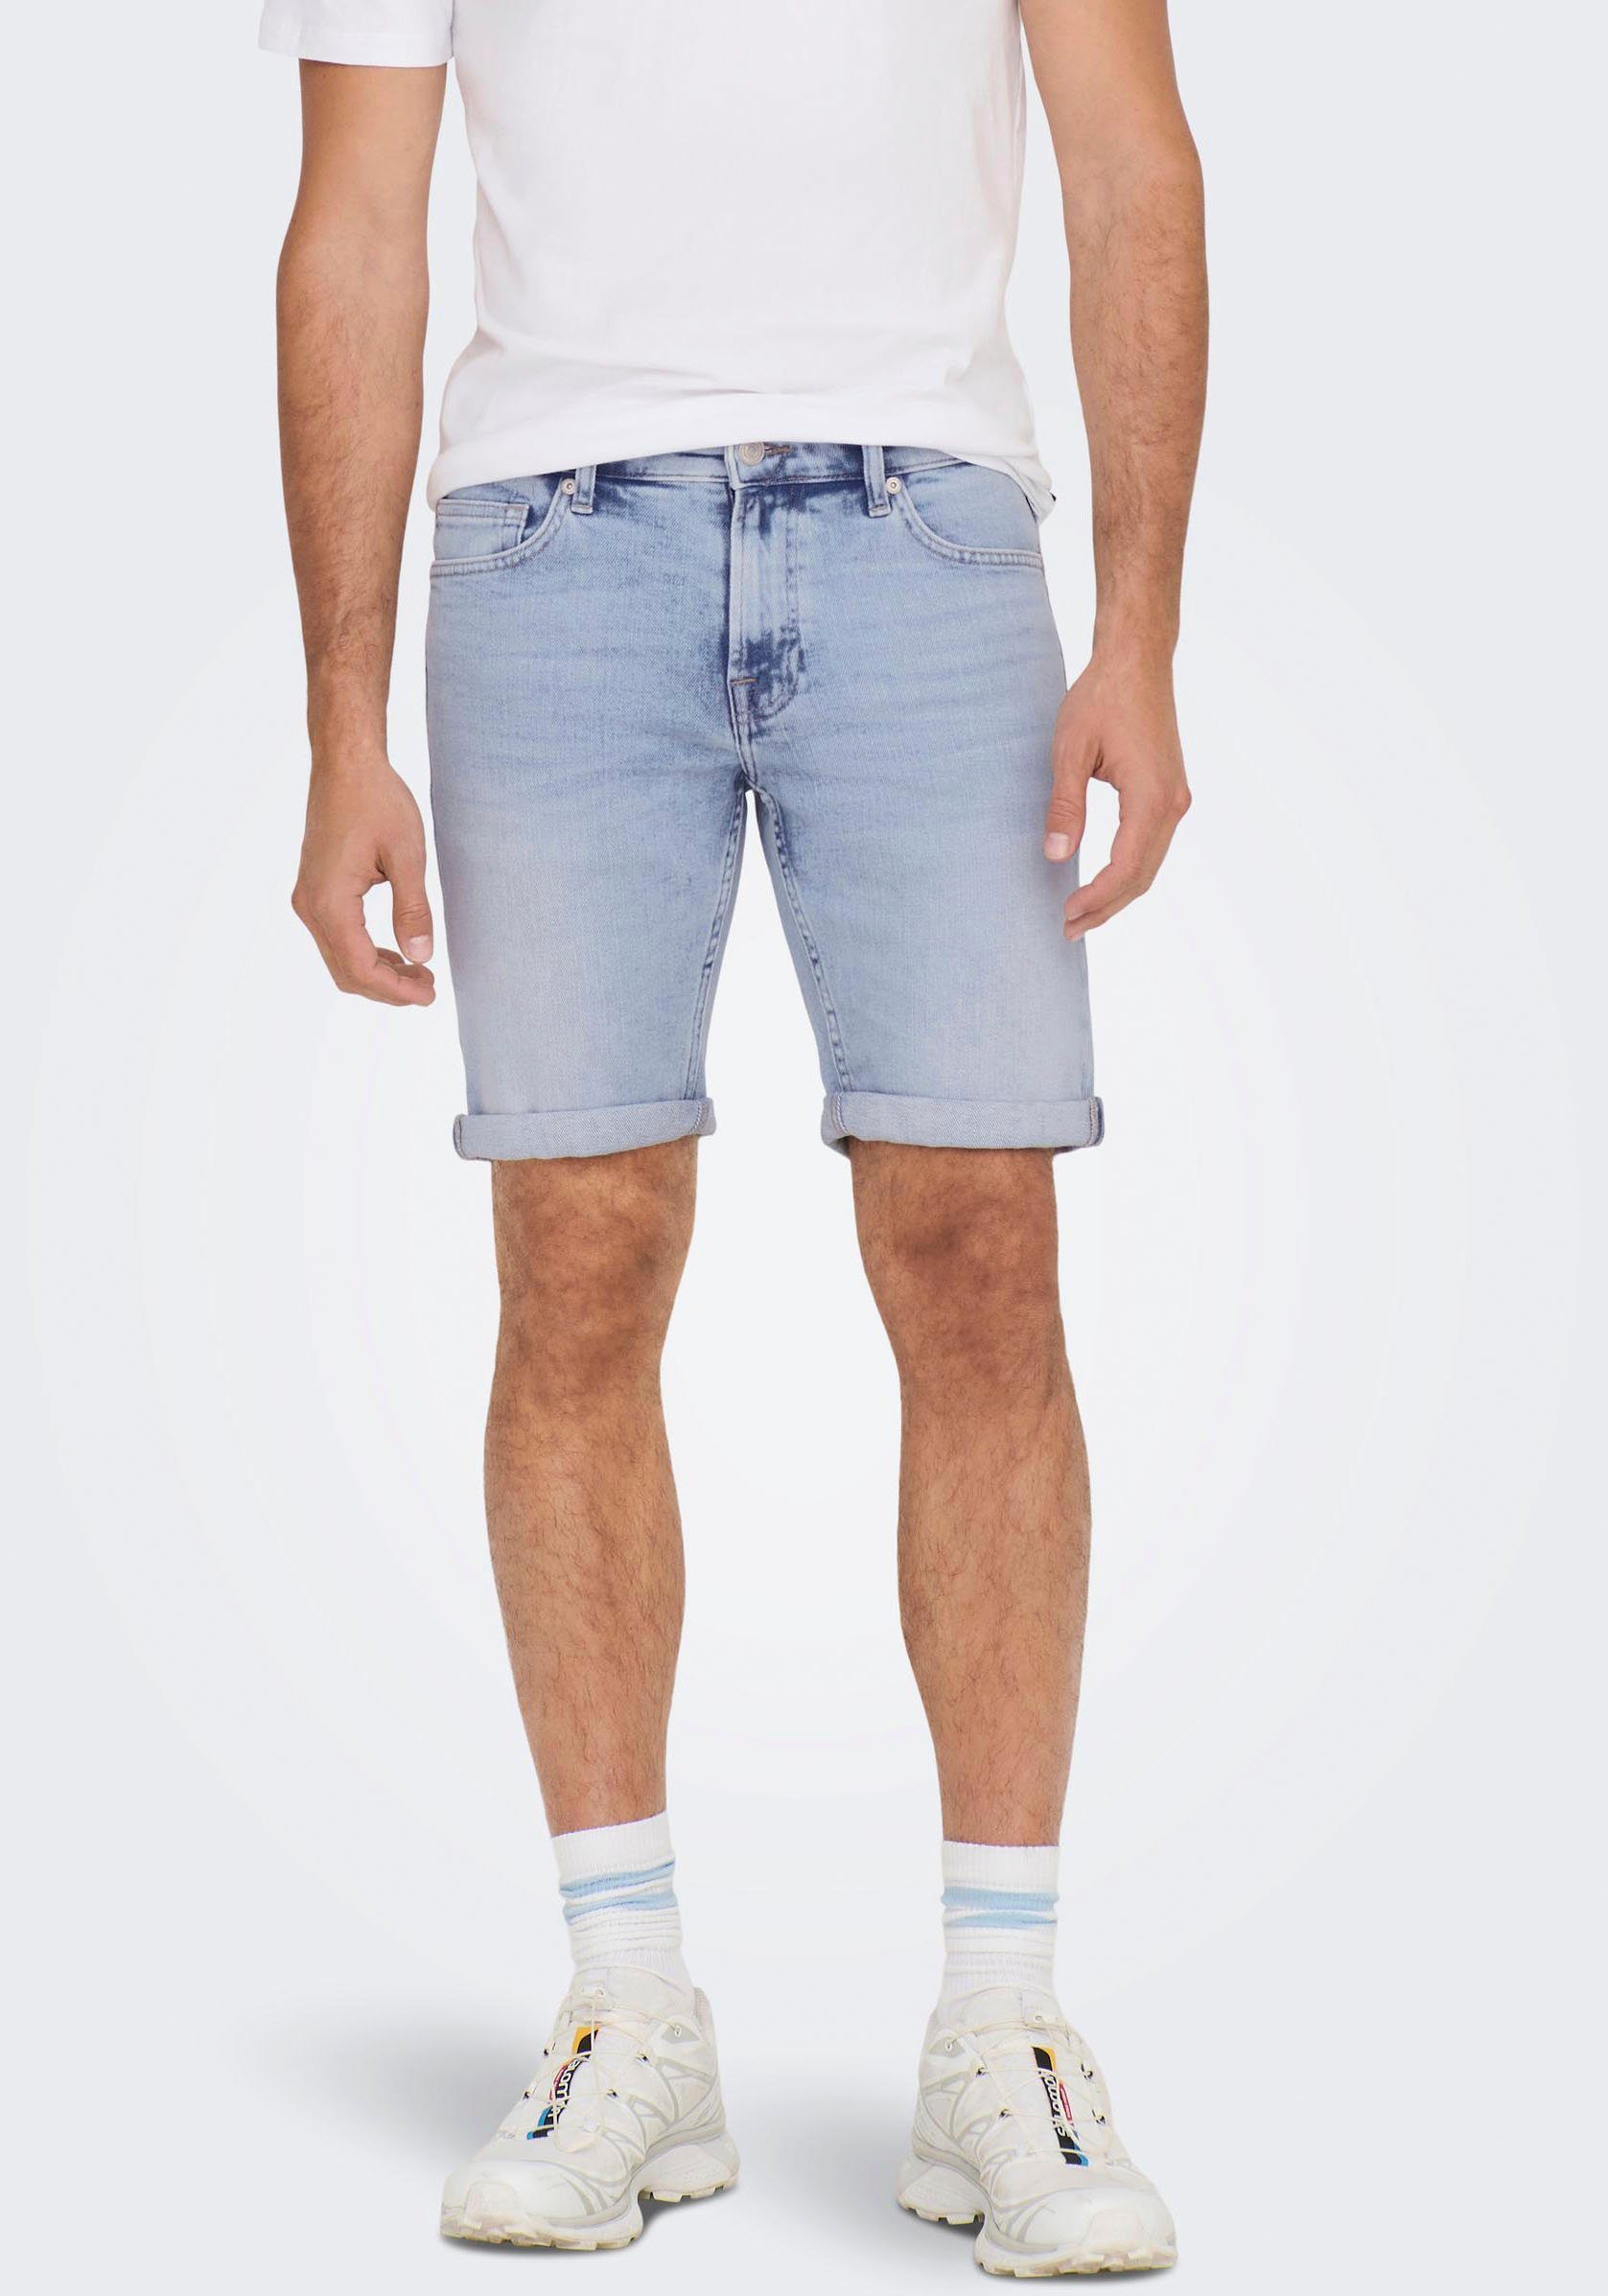 ONLY & SONS Jeansshorts ONSPLY LIGHT BLUE 5189 SHORTS DNM NOOS Light Blue Denim